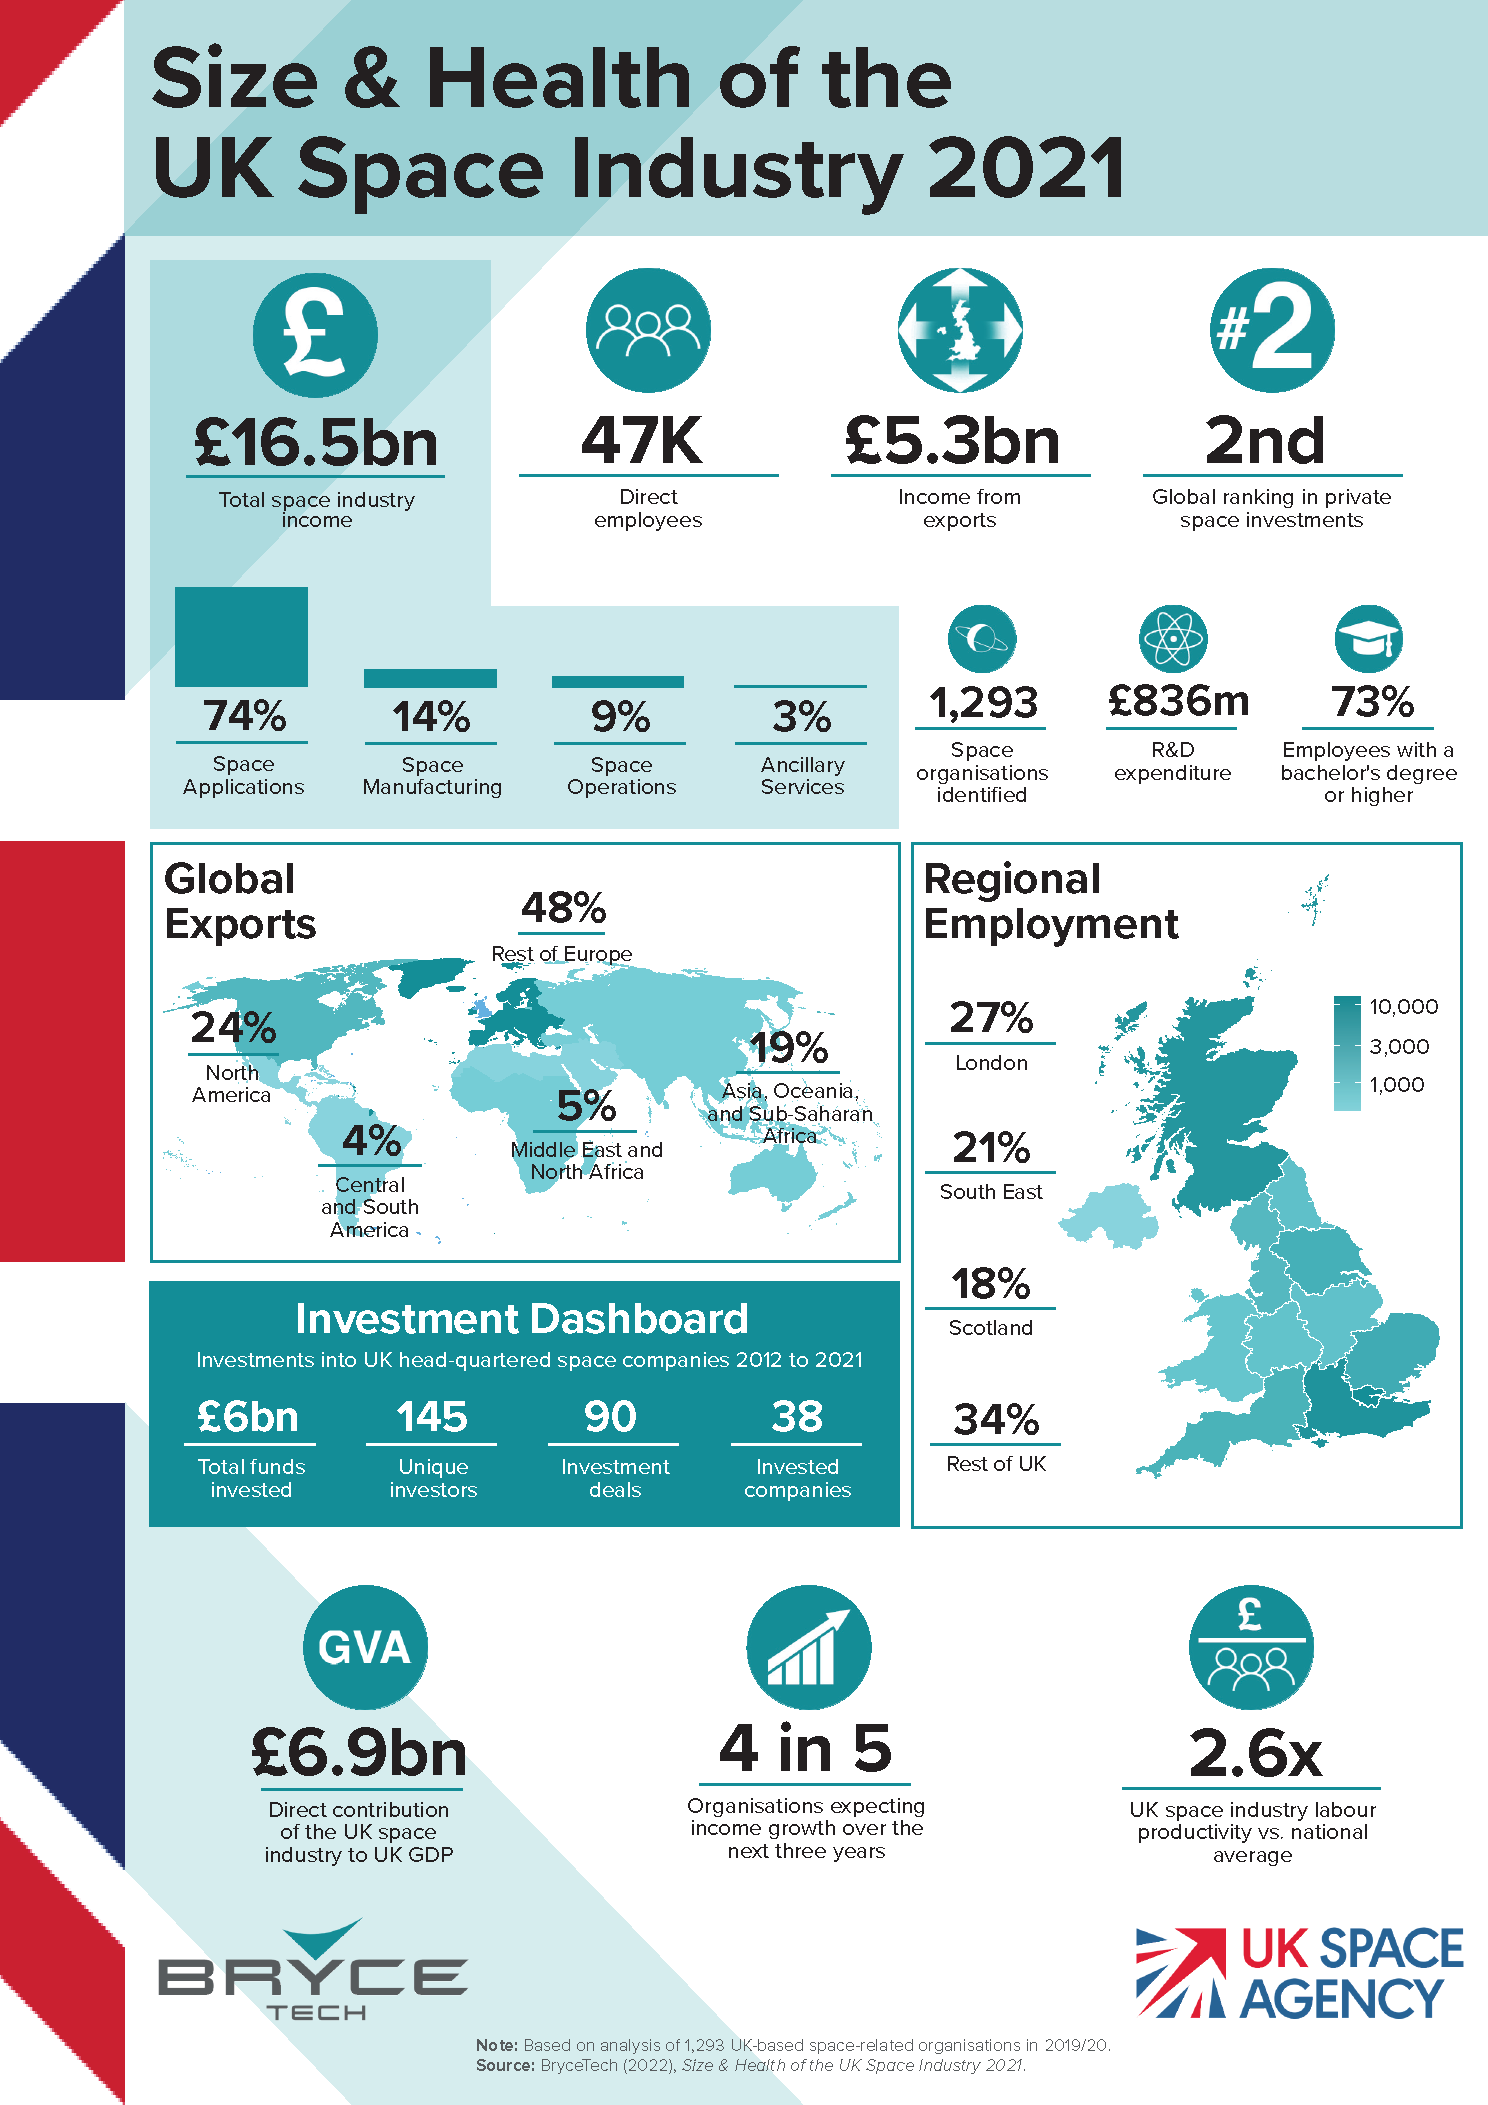 Size and Health of UK Space Industry 2021 infographic